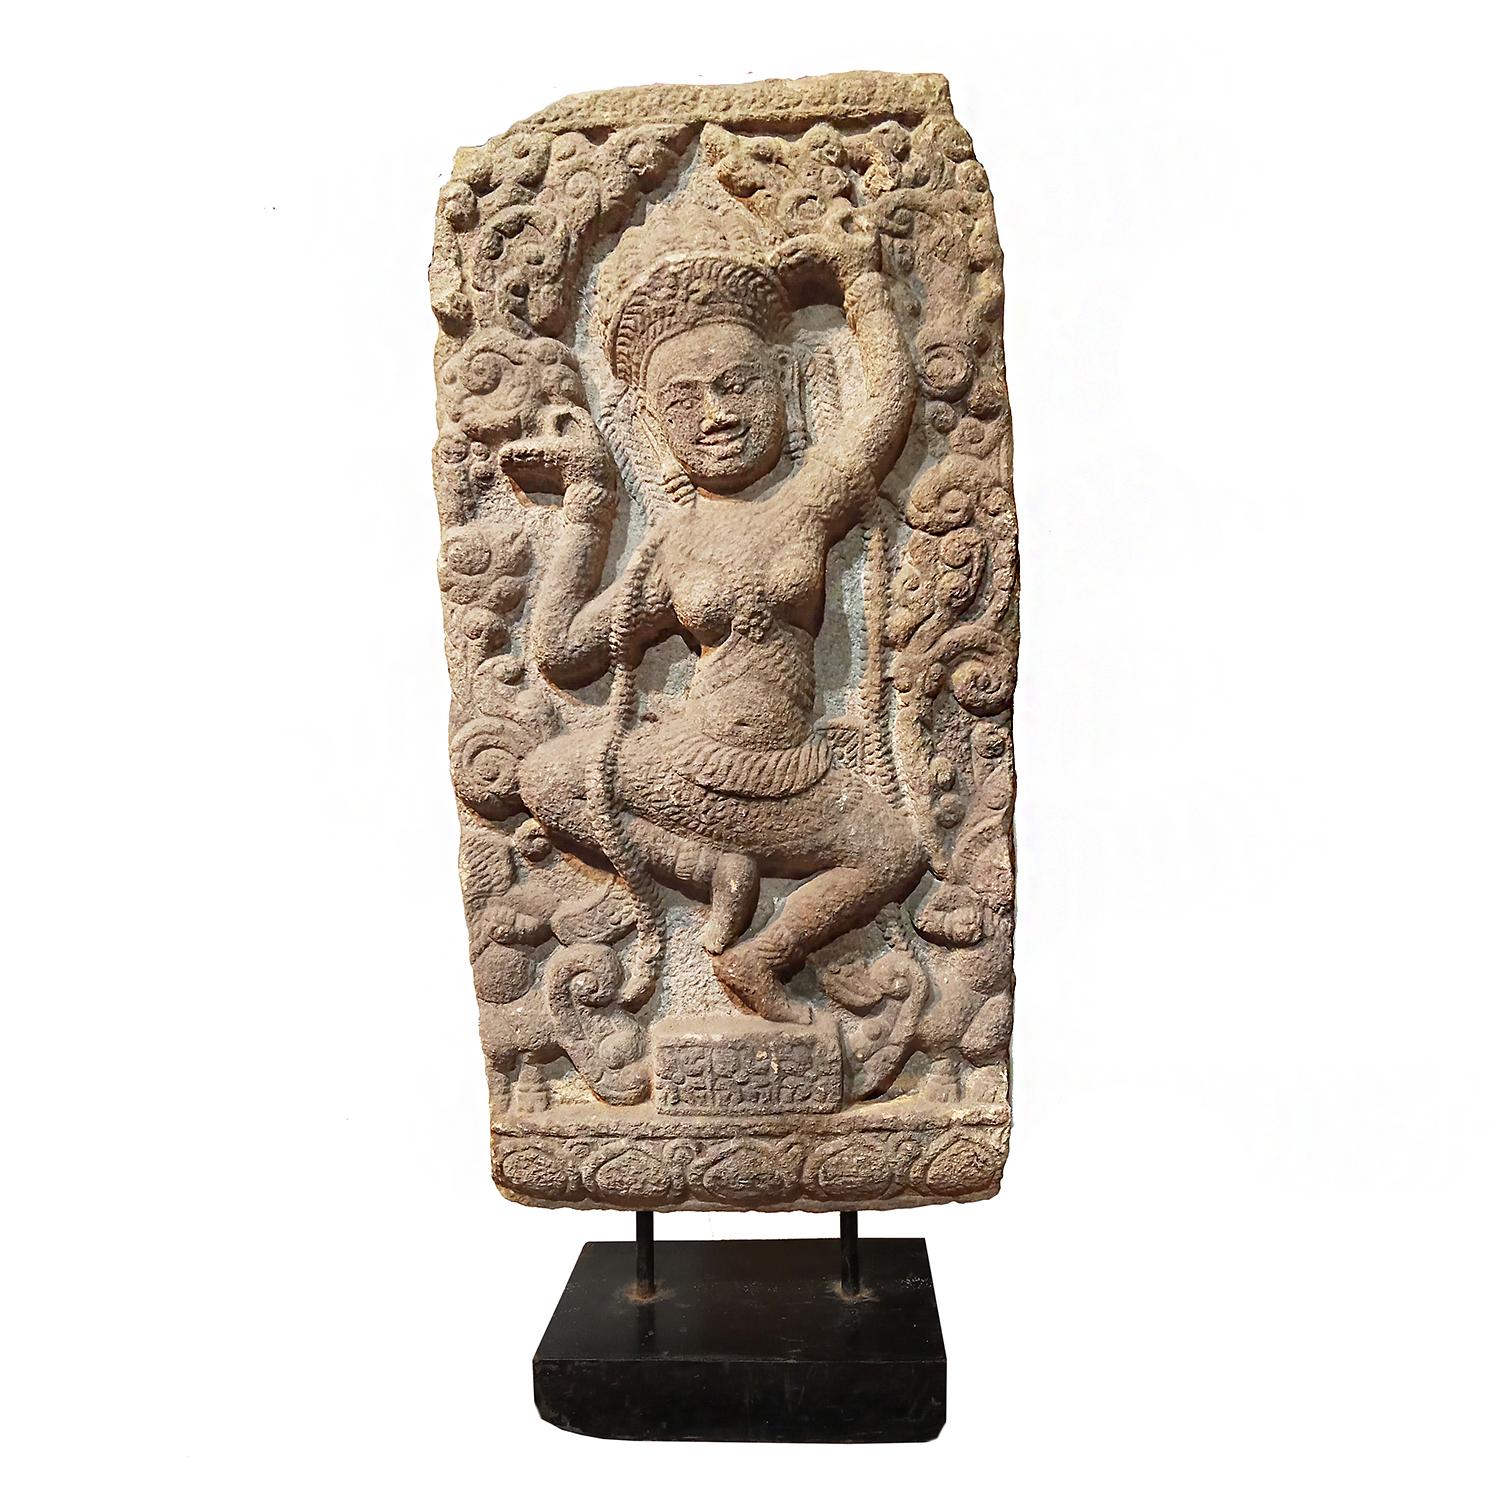 A stone relief of a dancing goddess, crafted in Thailand, late 20th Century. 

Hand-carved from a solid piece of amber-colored sandstone. 26.5 inches high, 3 inches deep, 12 inches wide. The carving is mounted on a 5